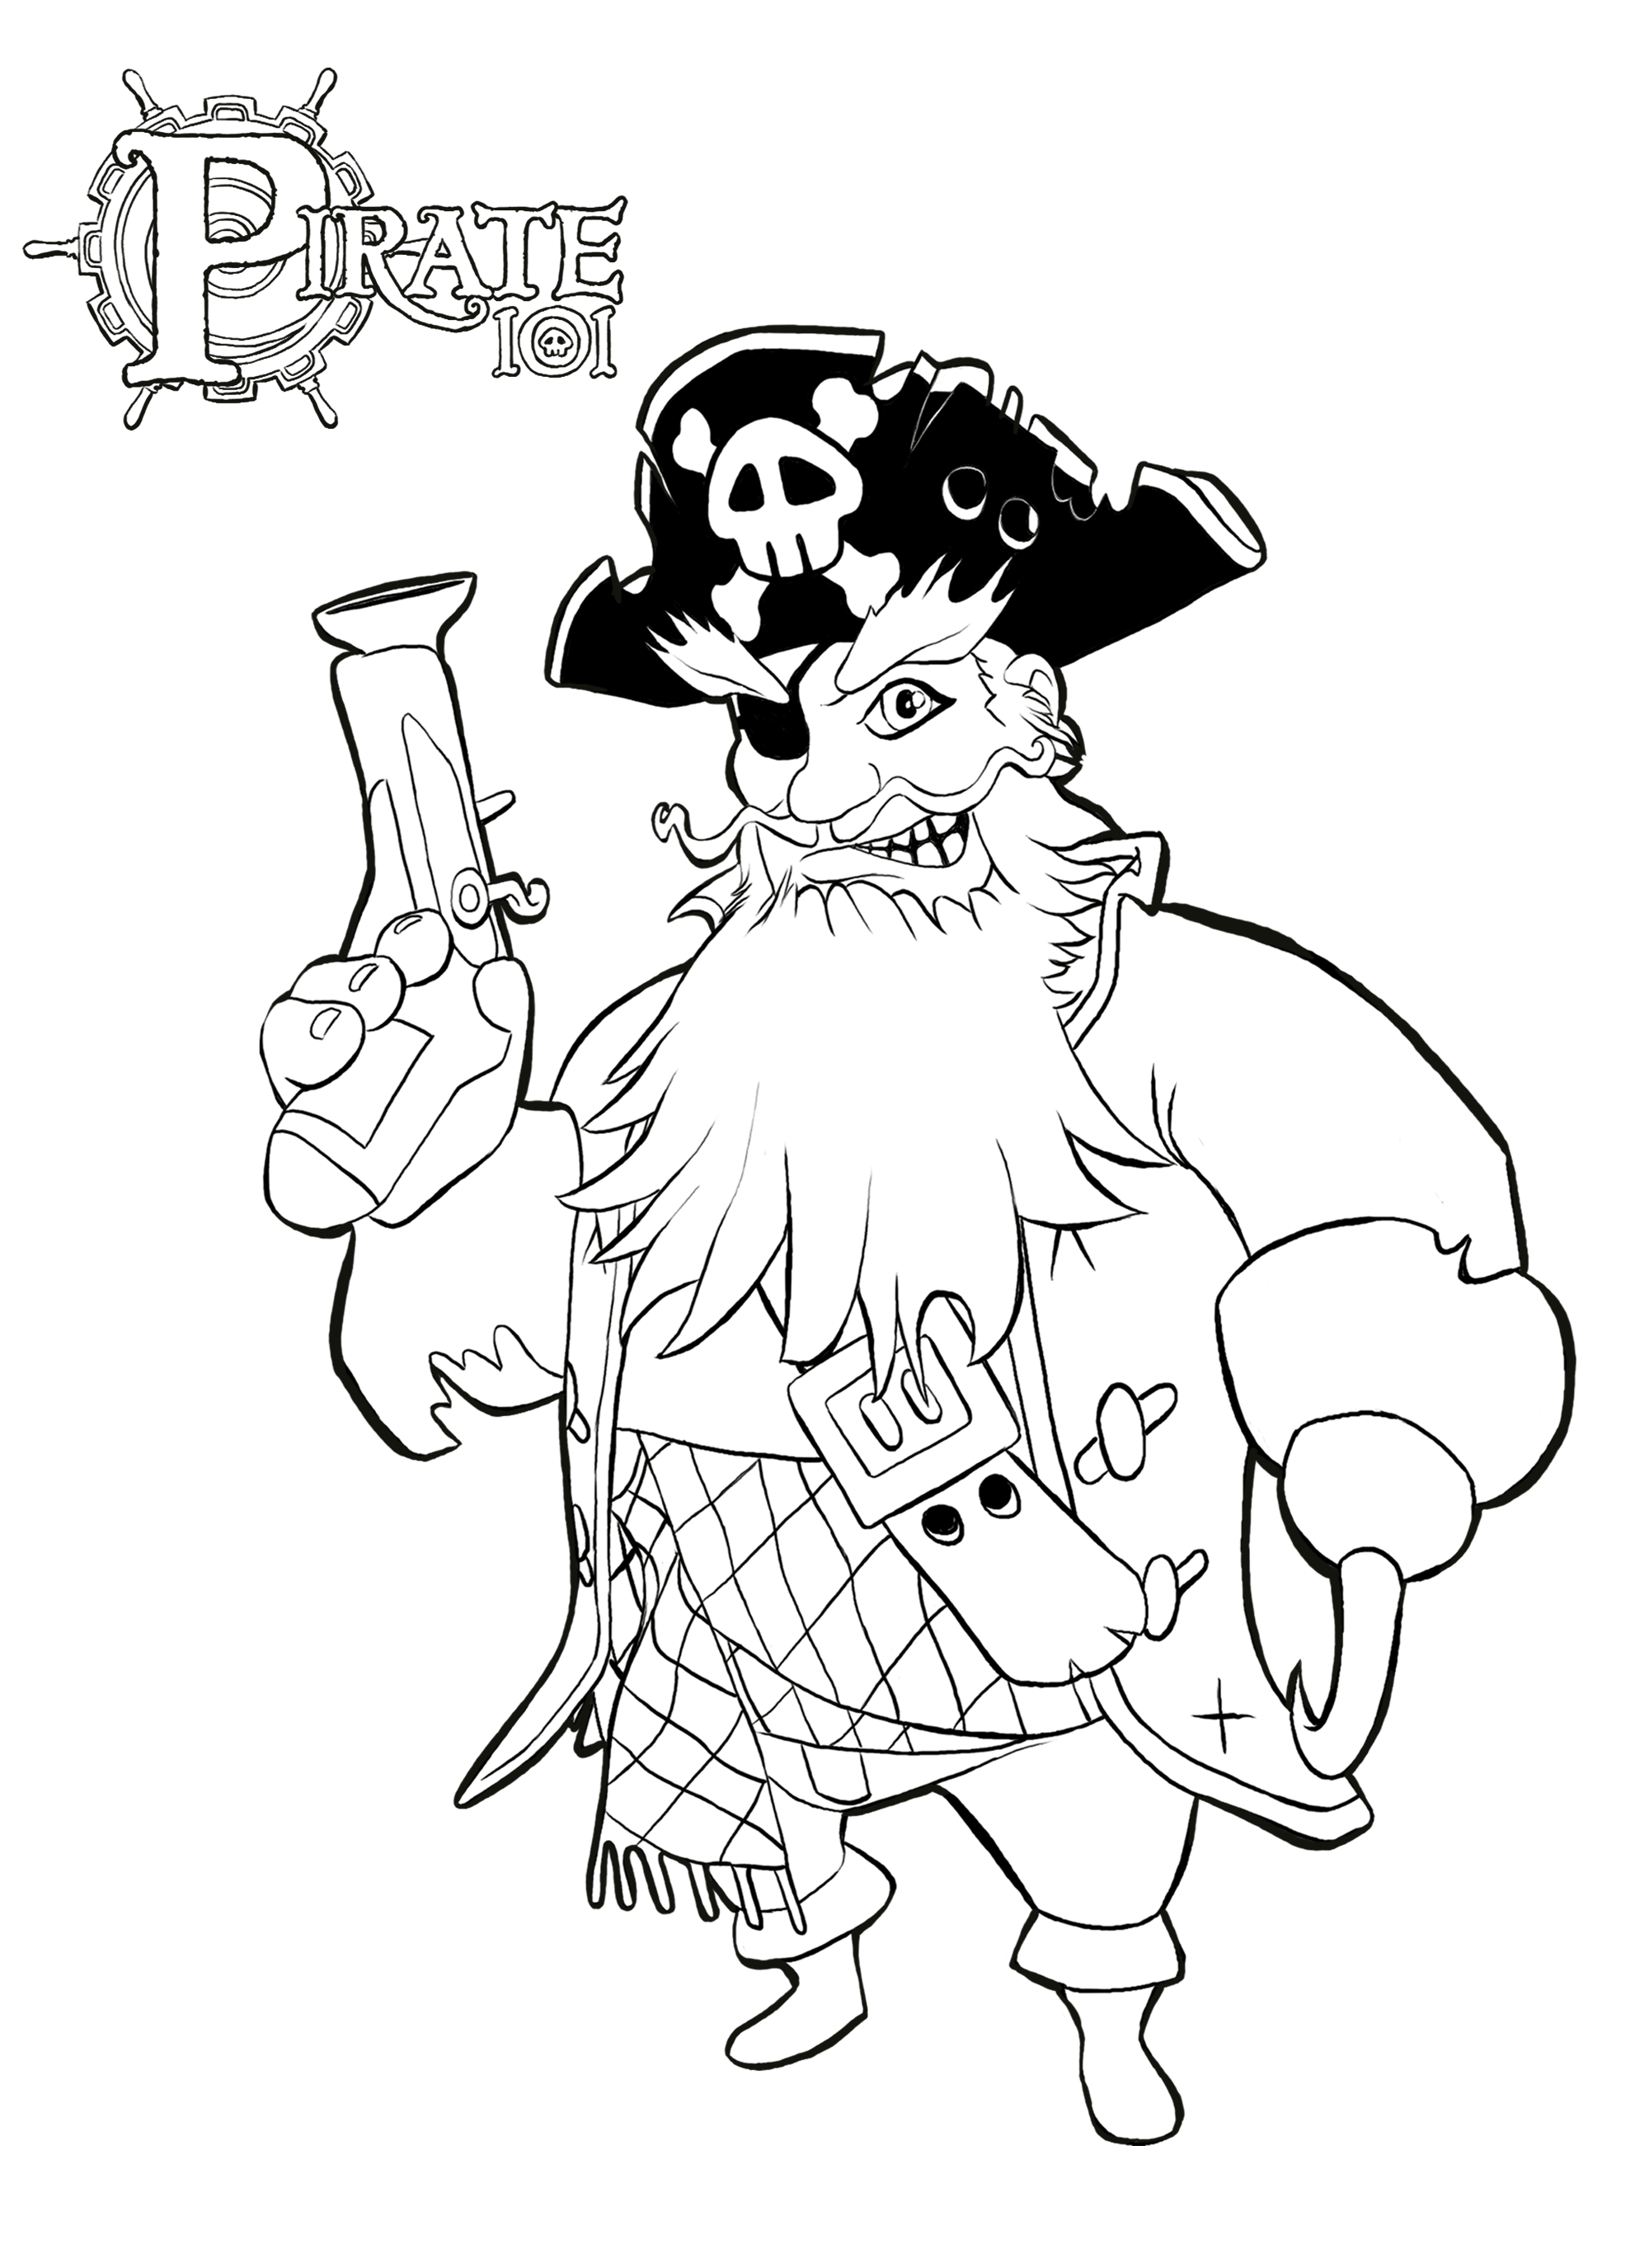 Pirate Coloring Pages | Pirate101 Free Online Game